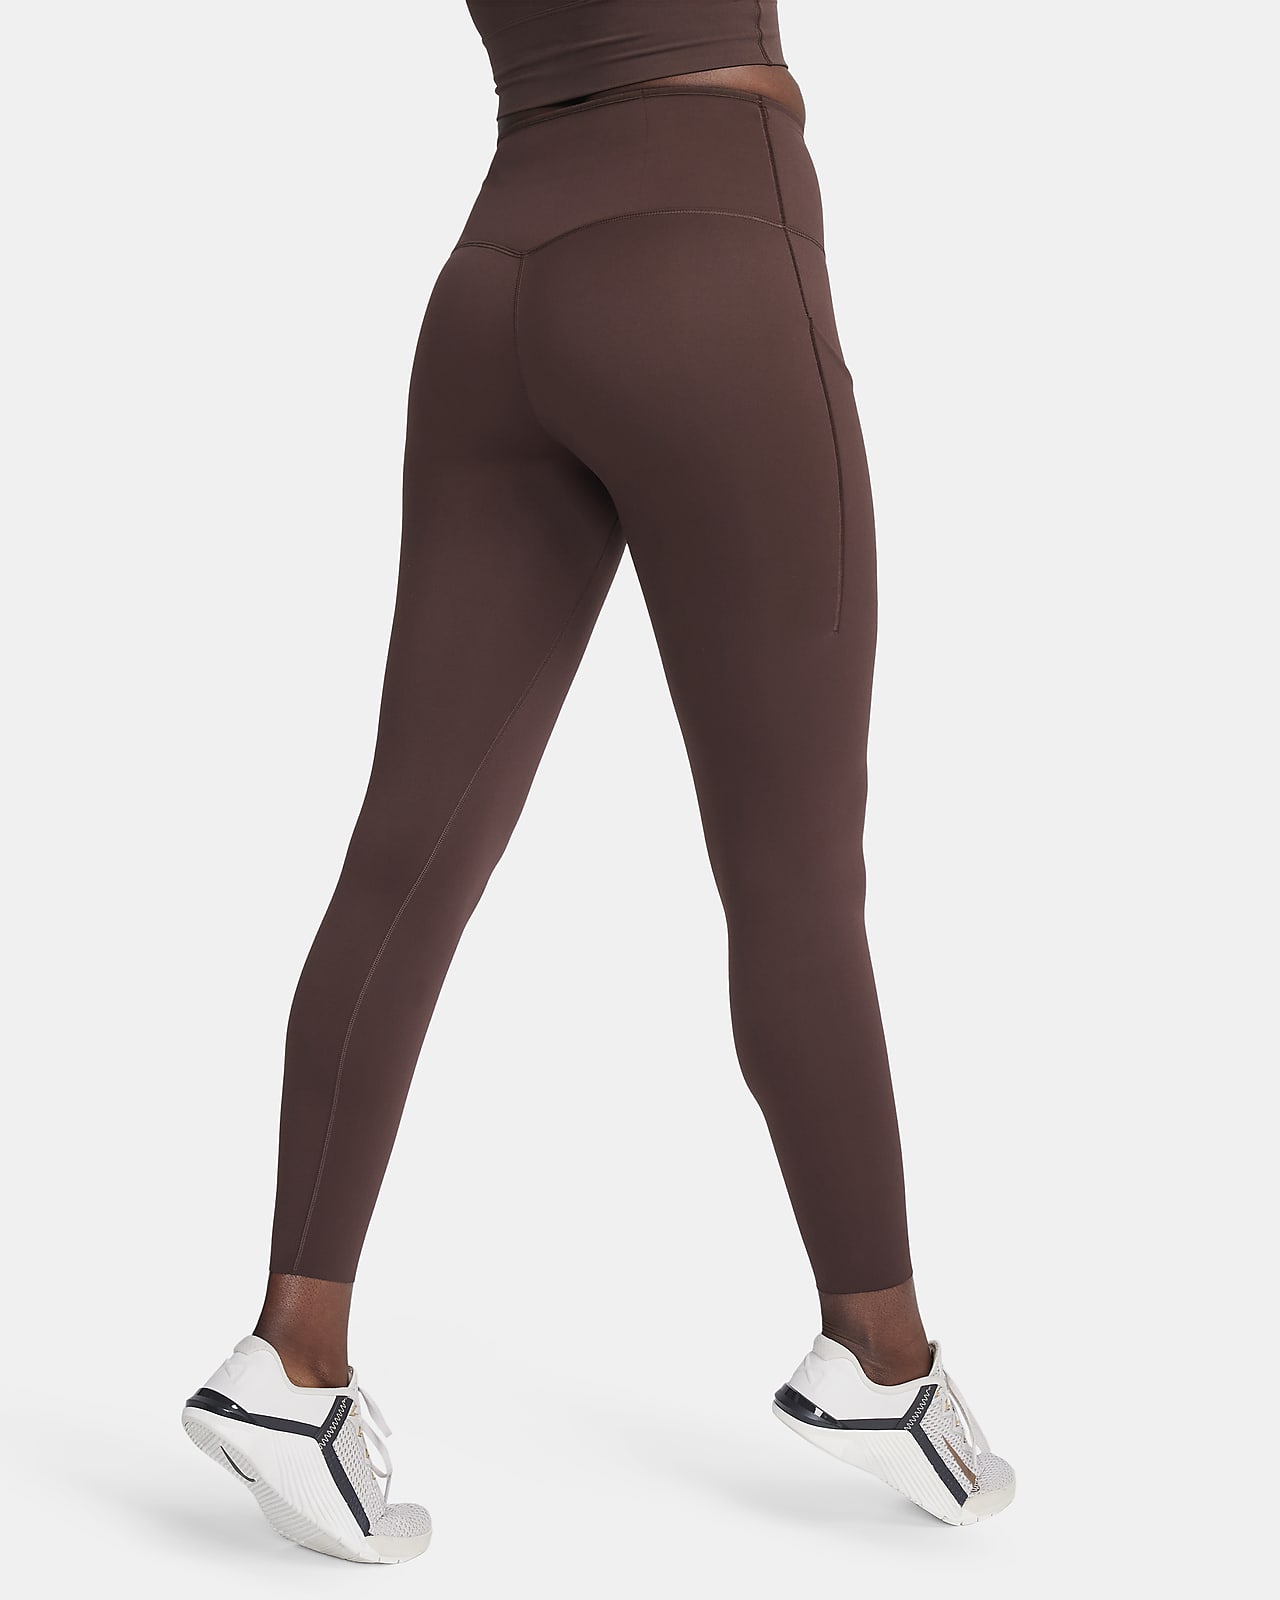 Trendy leggings to keep you and the Earth in shape!